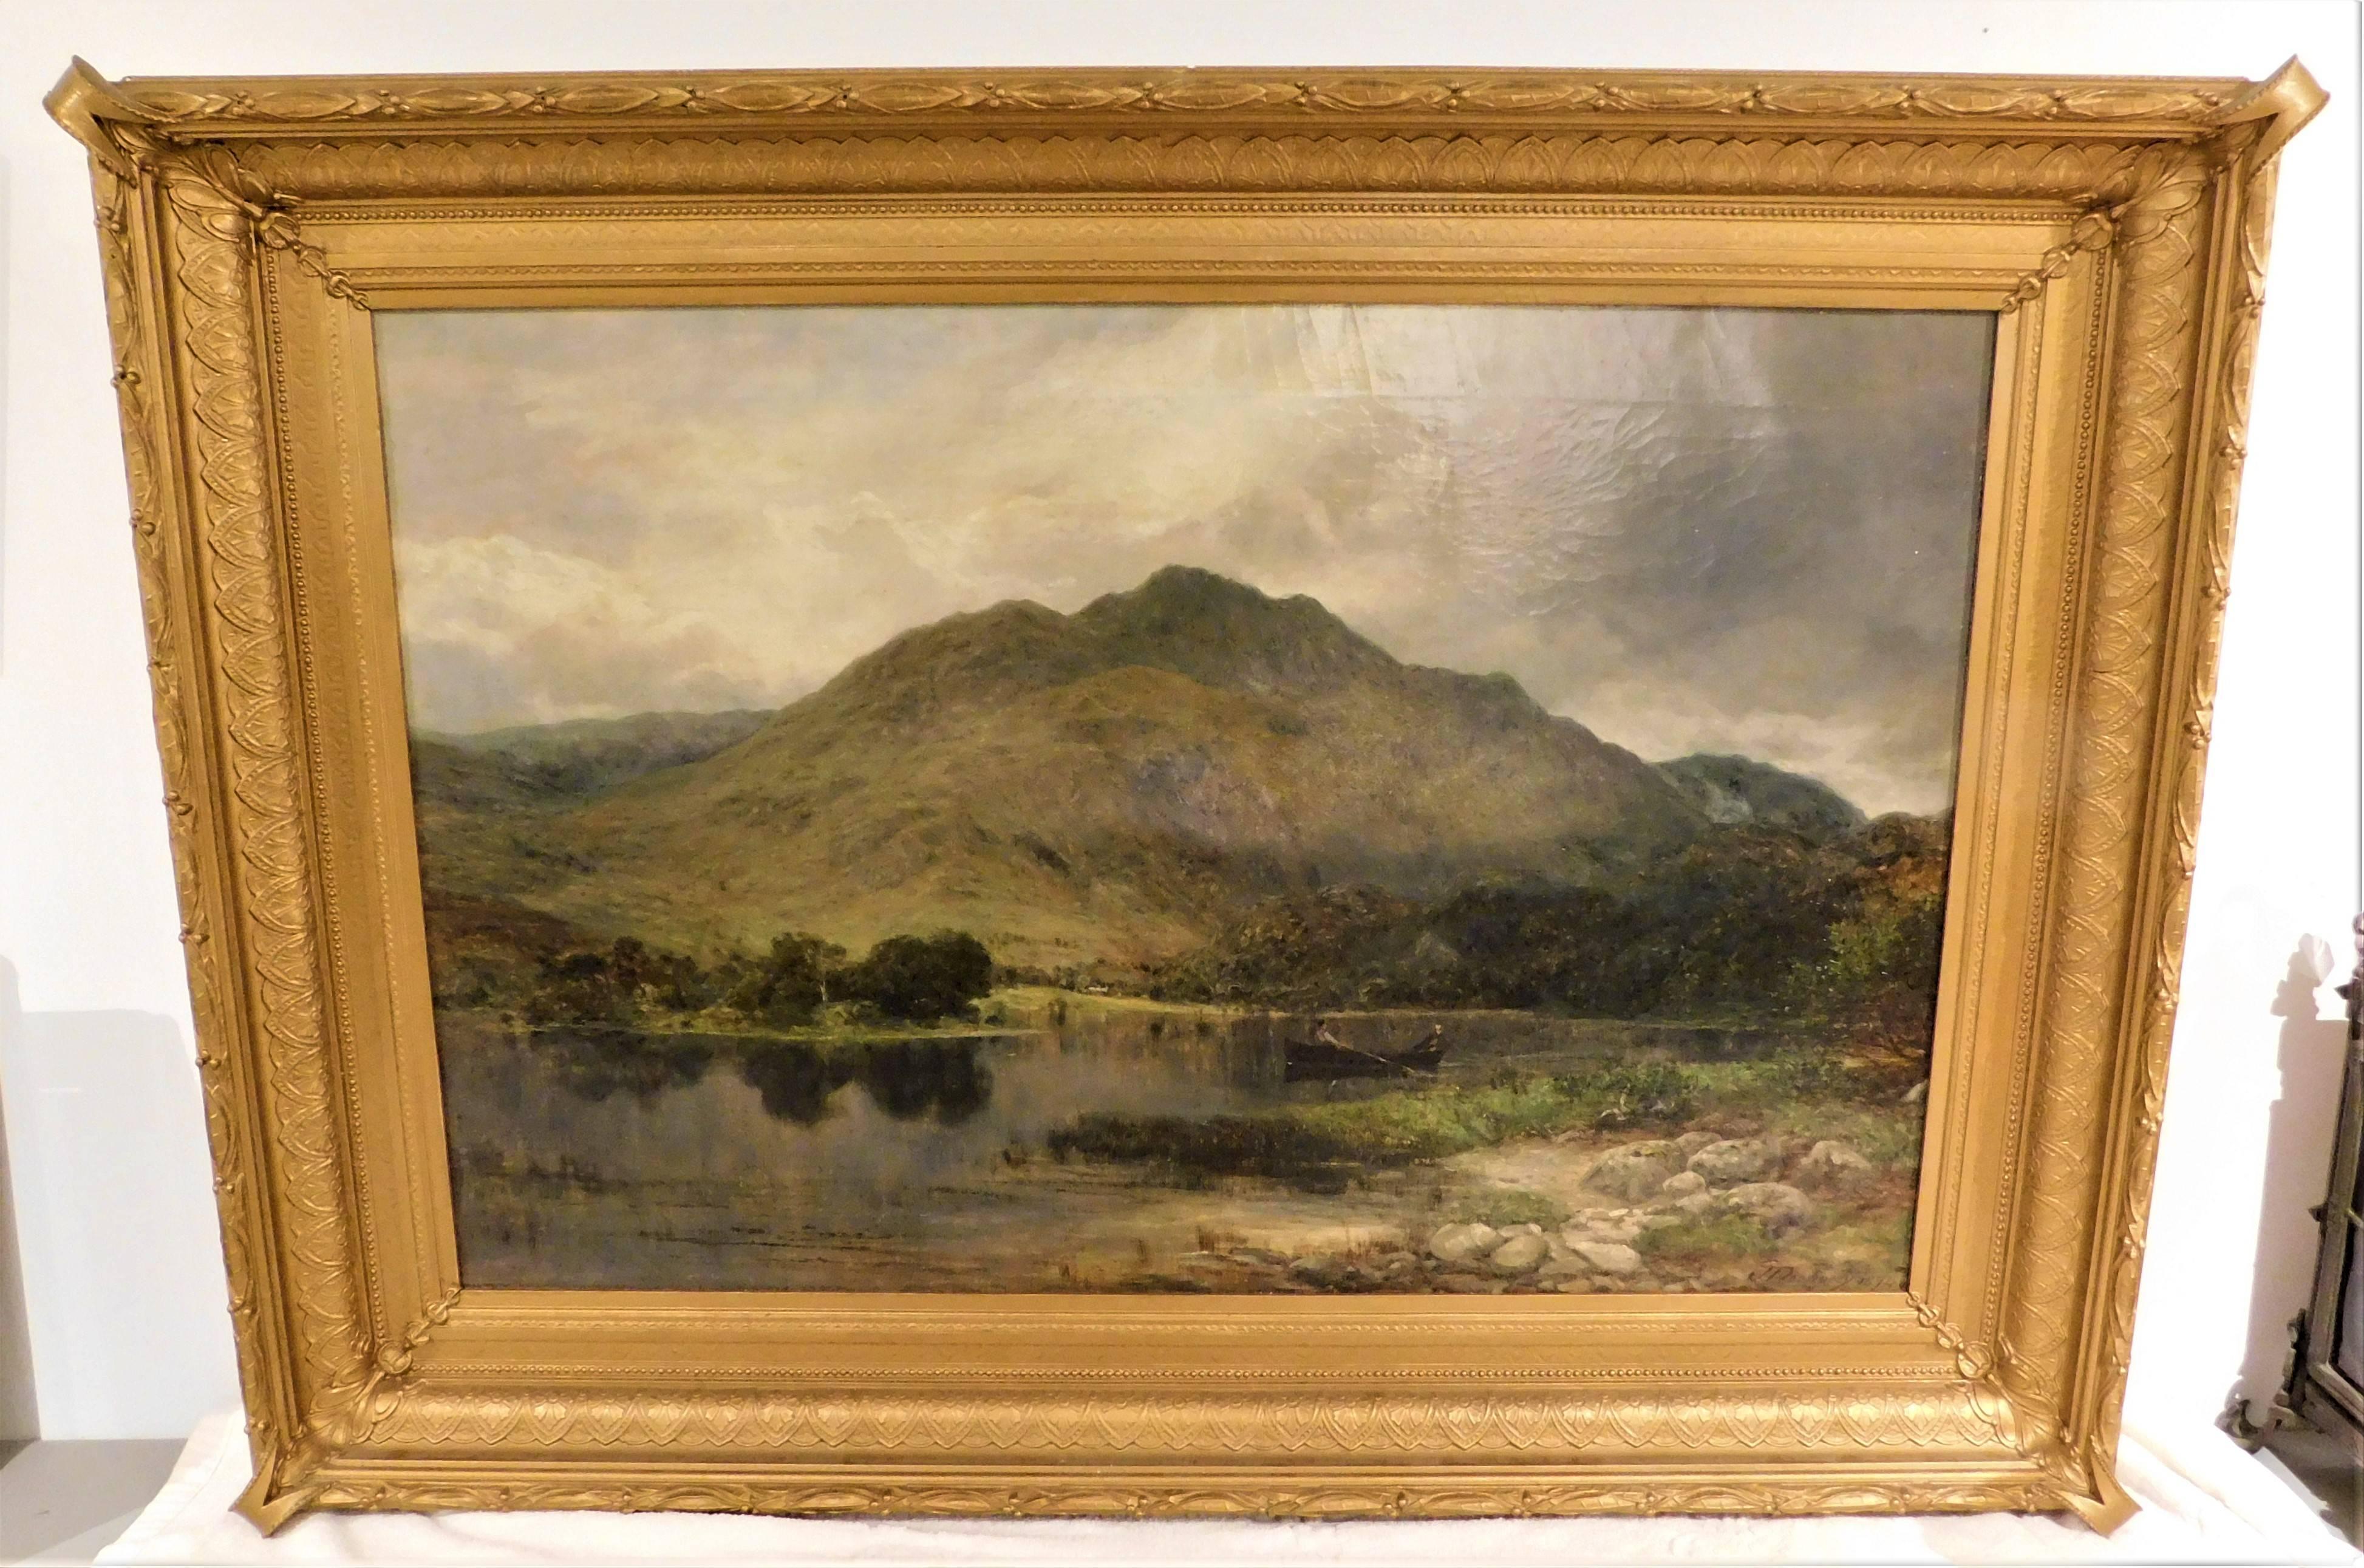 Scottish artist James Docharty (1829-1878) 1874 oil on canvas painting with a beautiful ornate original gold frame.
Actual picture size: 24 inches wide x 36.25 inches long x 1 inch deep
Frame size: 32.75 inches wide x 45 inches long x 3.5 inch